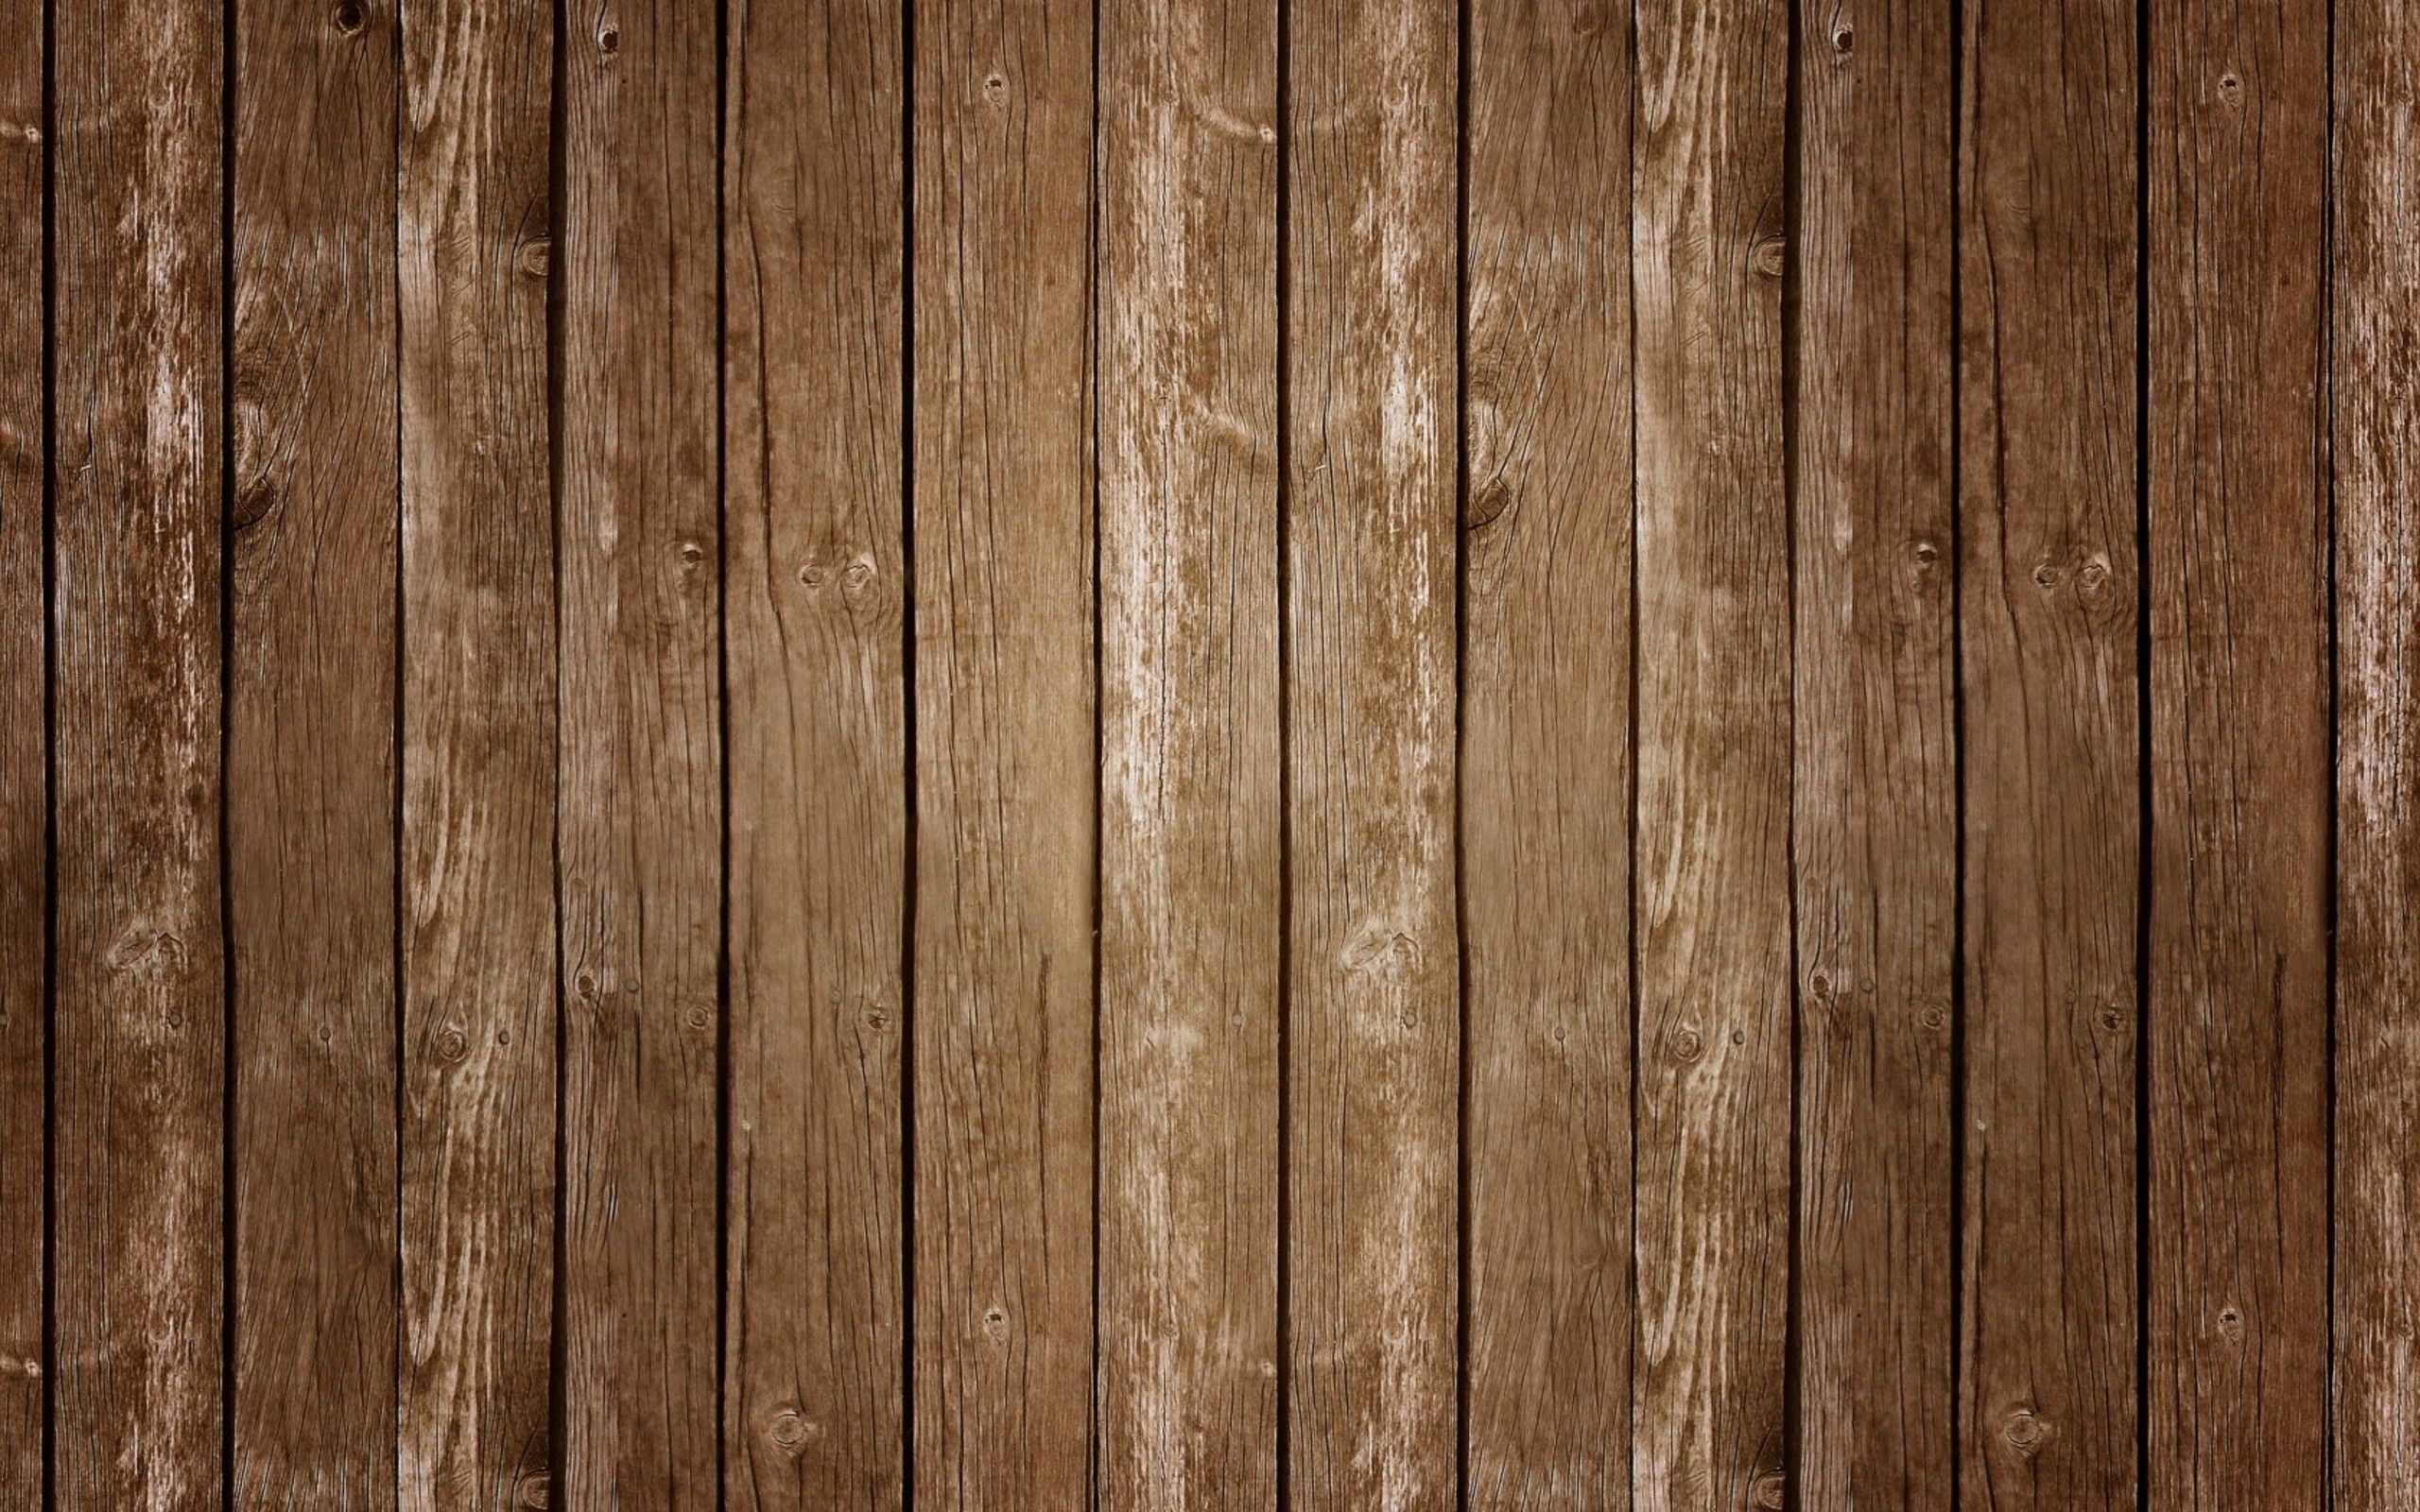 2560x1600 ... Old Weathered Rustic Rustic Barn Wood Background And Wood Computer Wallpapers Desktop Backgrounds &acirc;&#128;&brvbar; | Free wood texture, Wood wallpaper, Wood texture